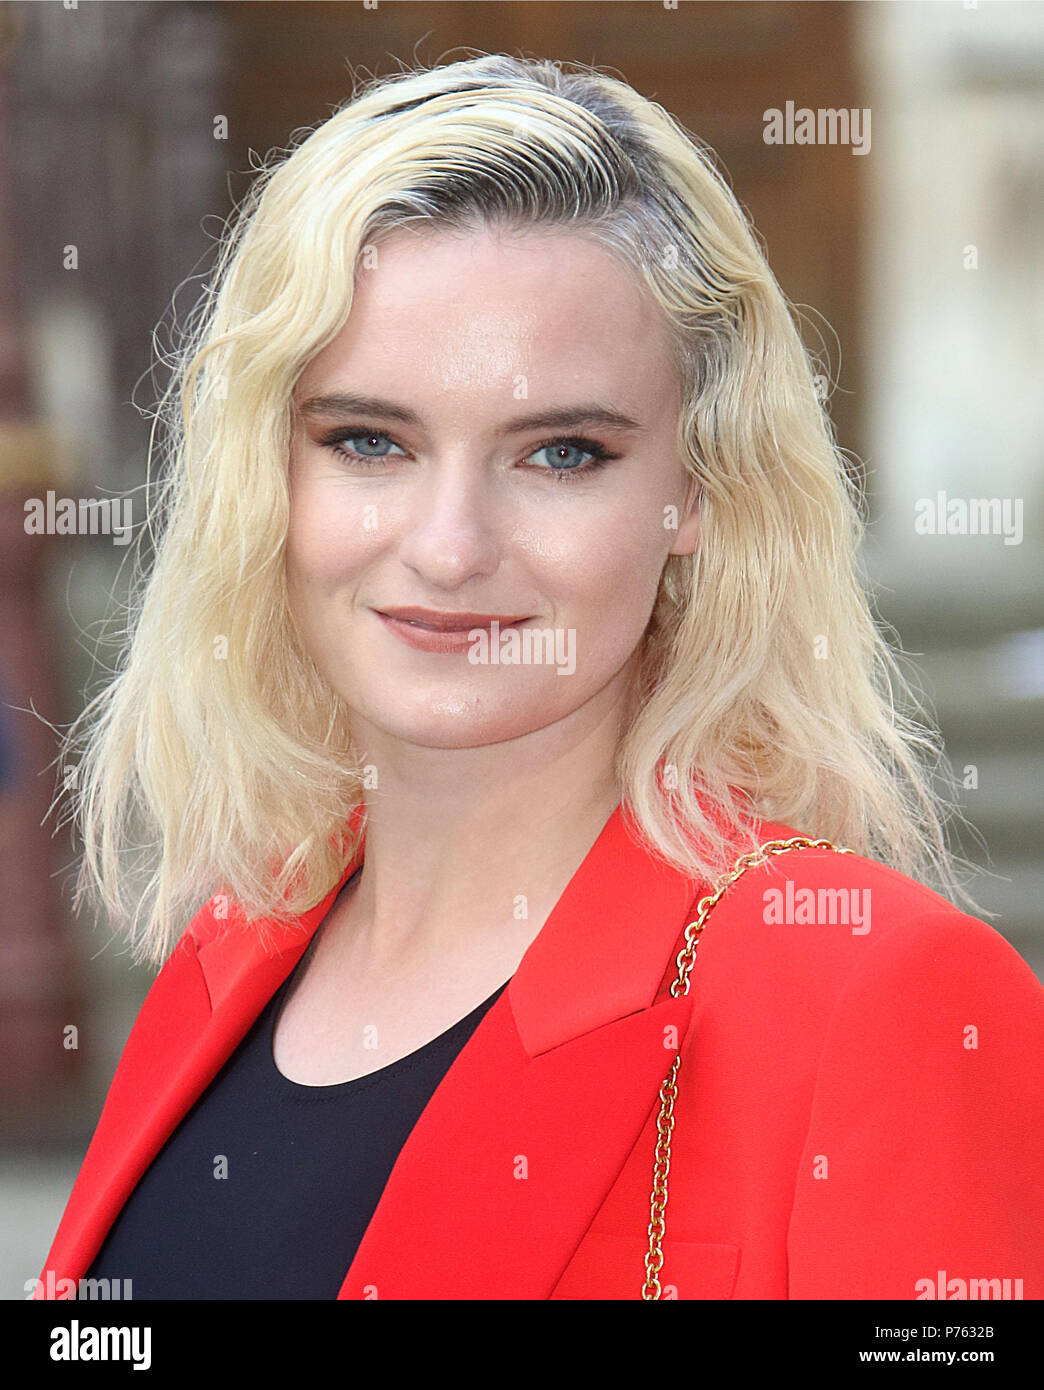 Jun 06, 2018 - Grace Chatto attending Royal Academy Of Arts 250th Summer Exhibition Preview Party at Burlington House in London, England, UK Stock Photo